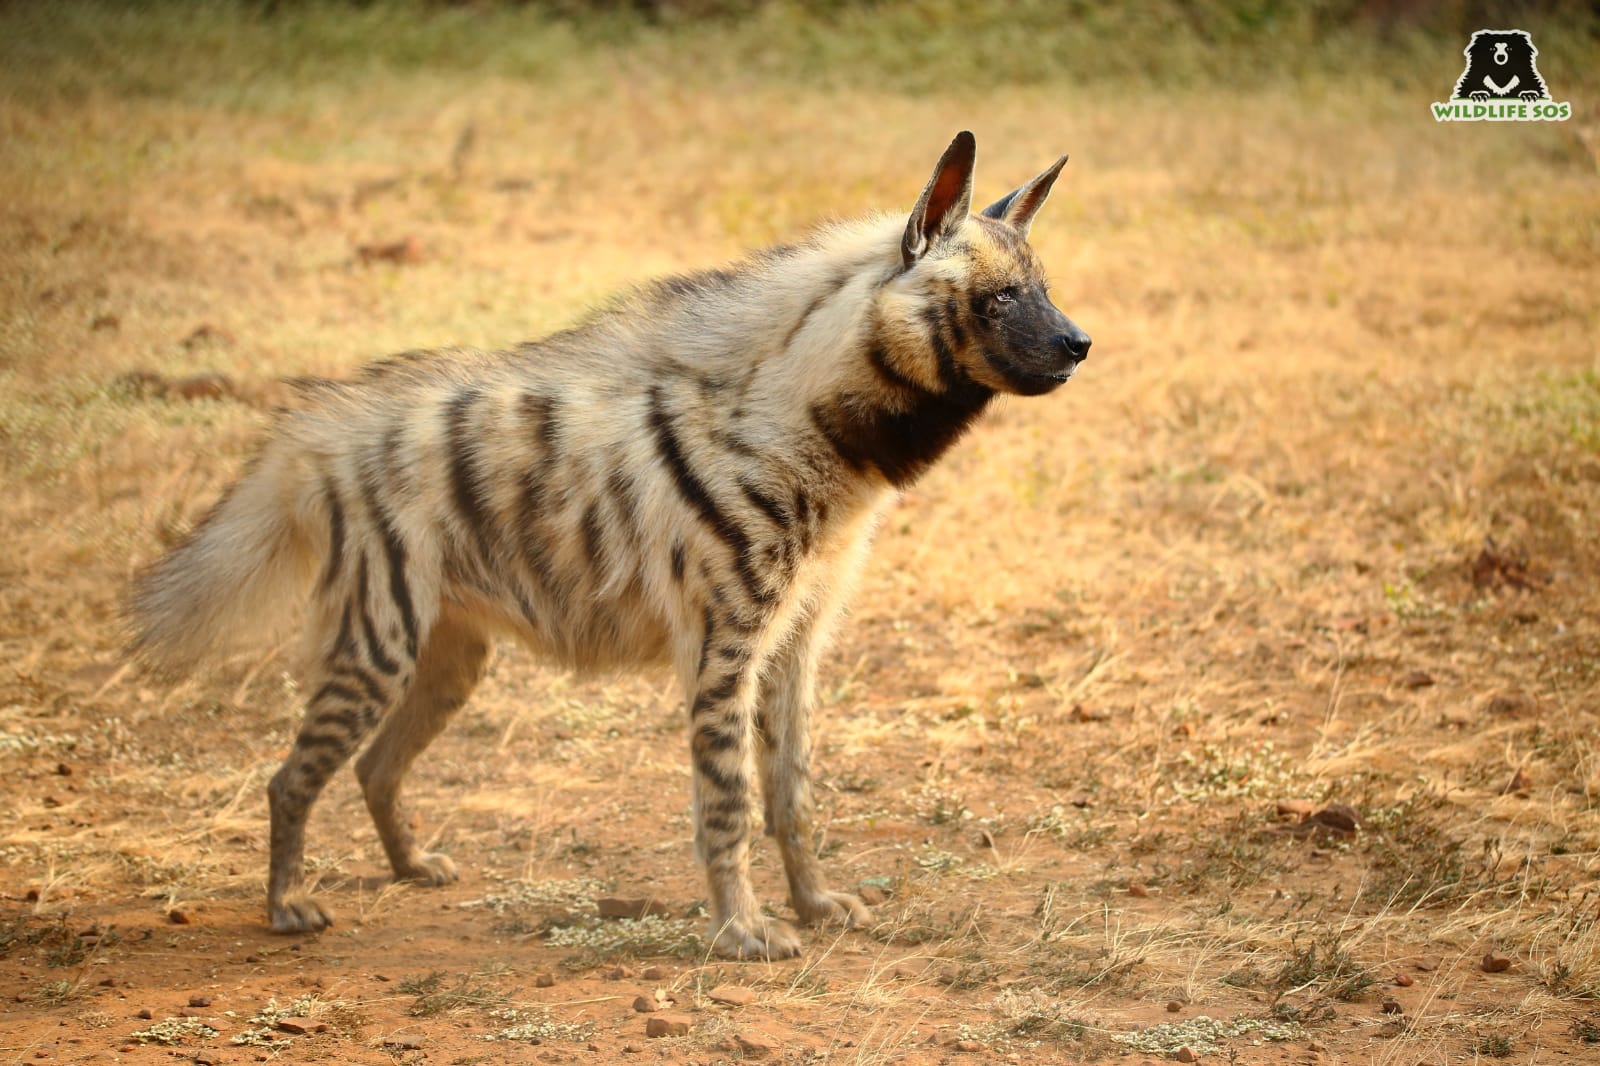 According to WPA Amendment Bill, animals like Striped Hyena can now be declared as vermin and hunted